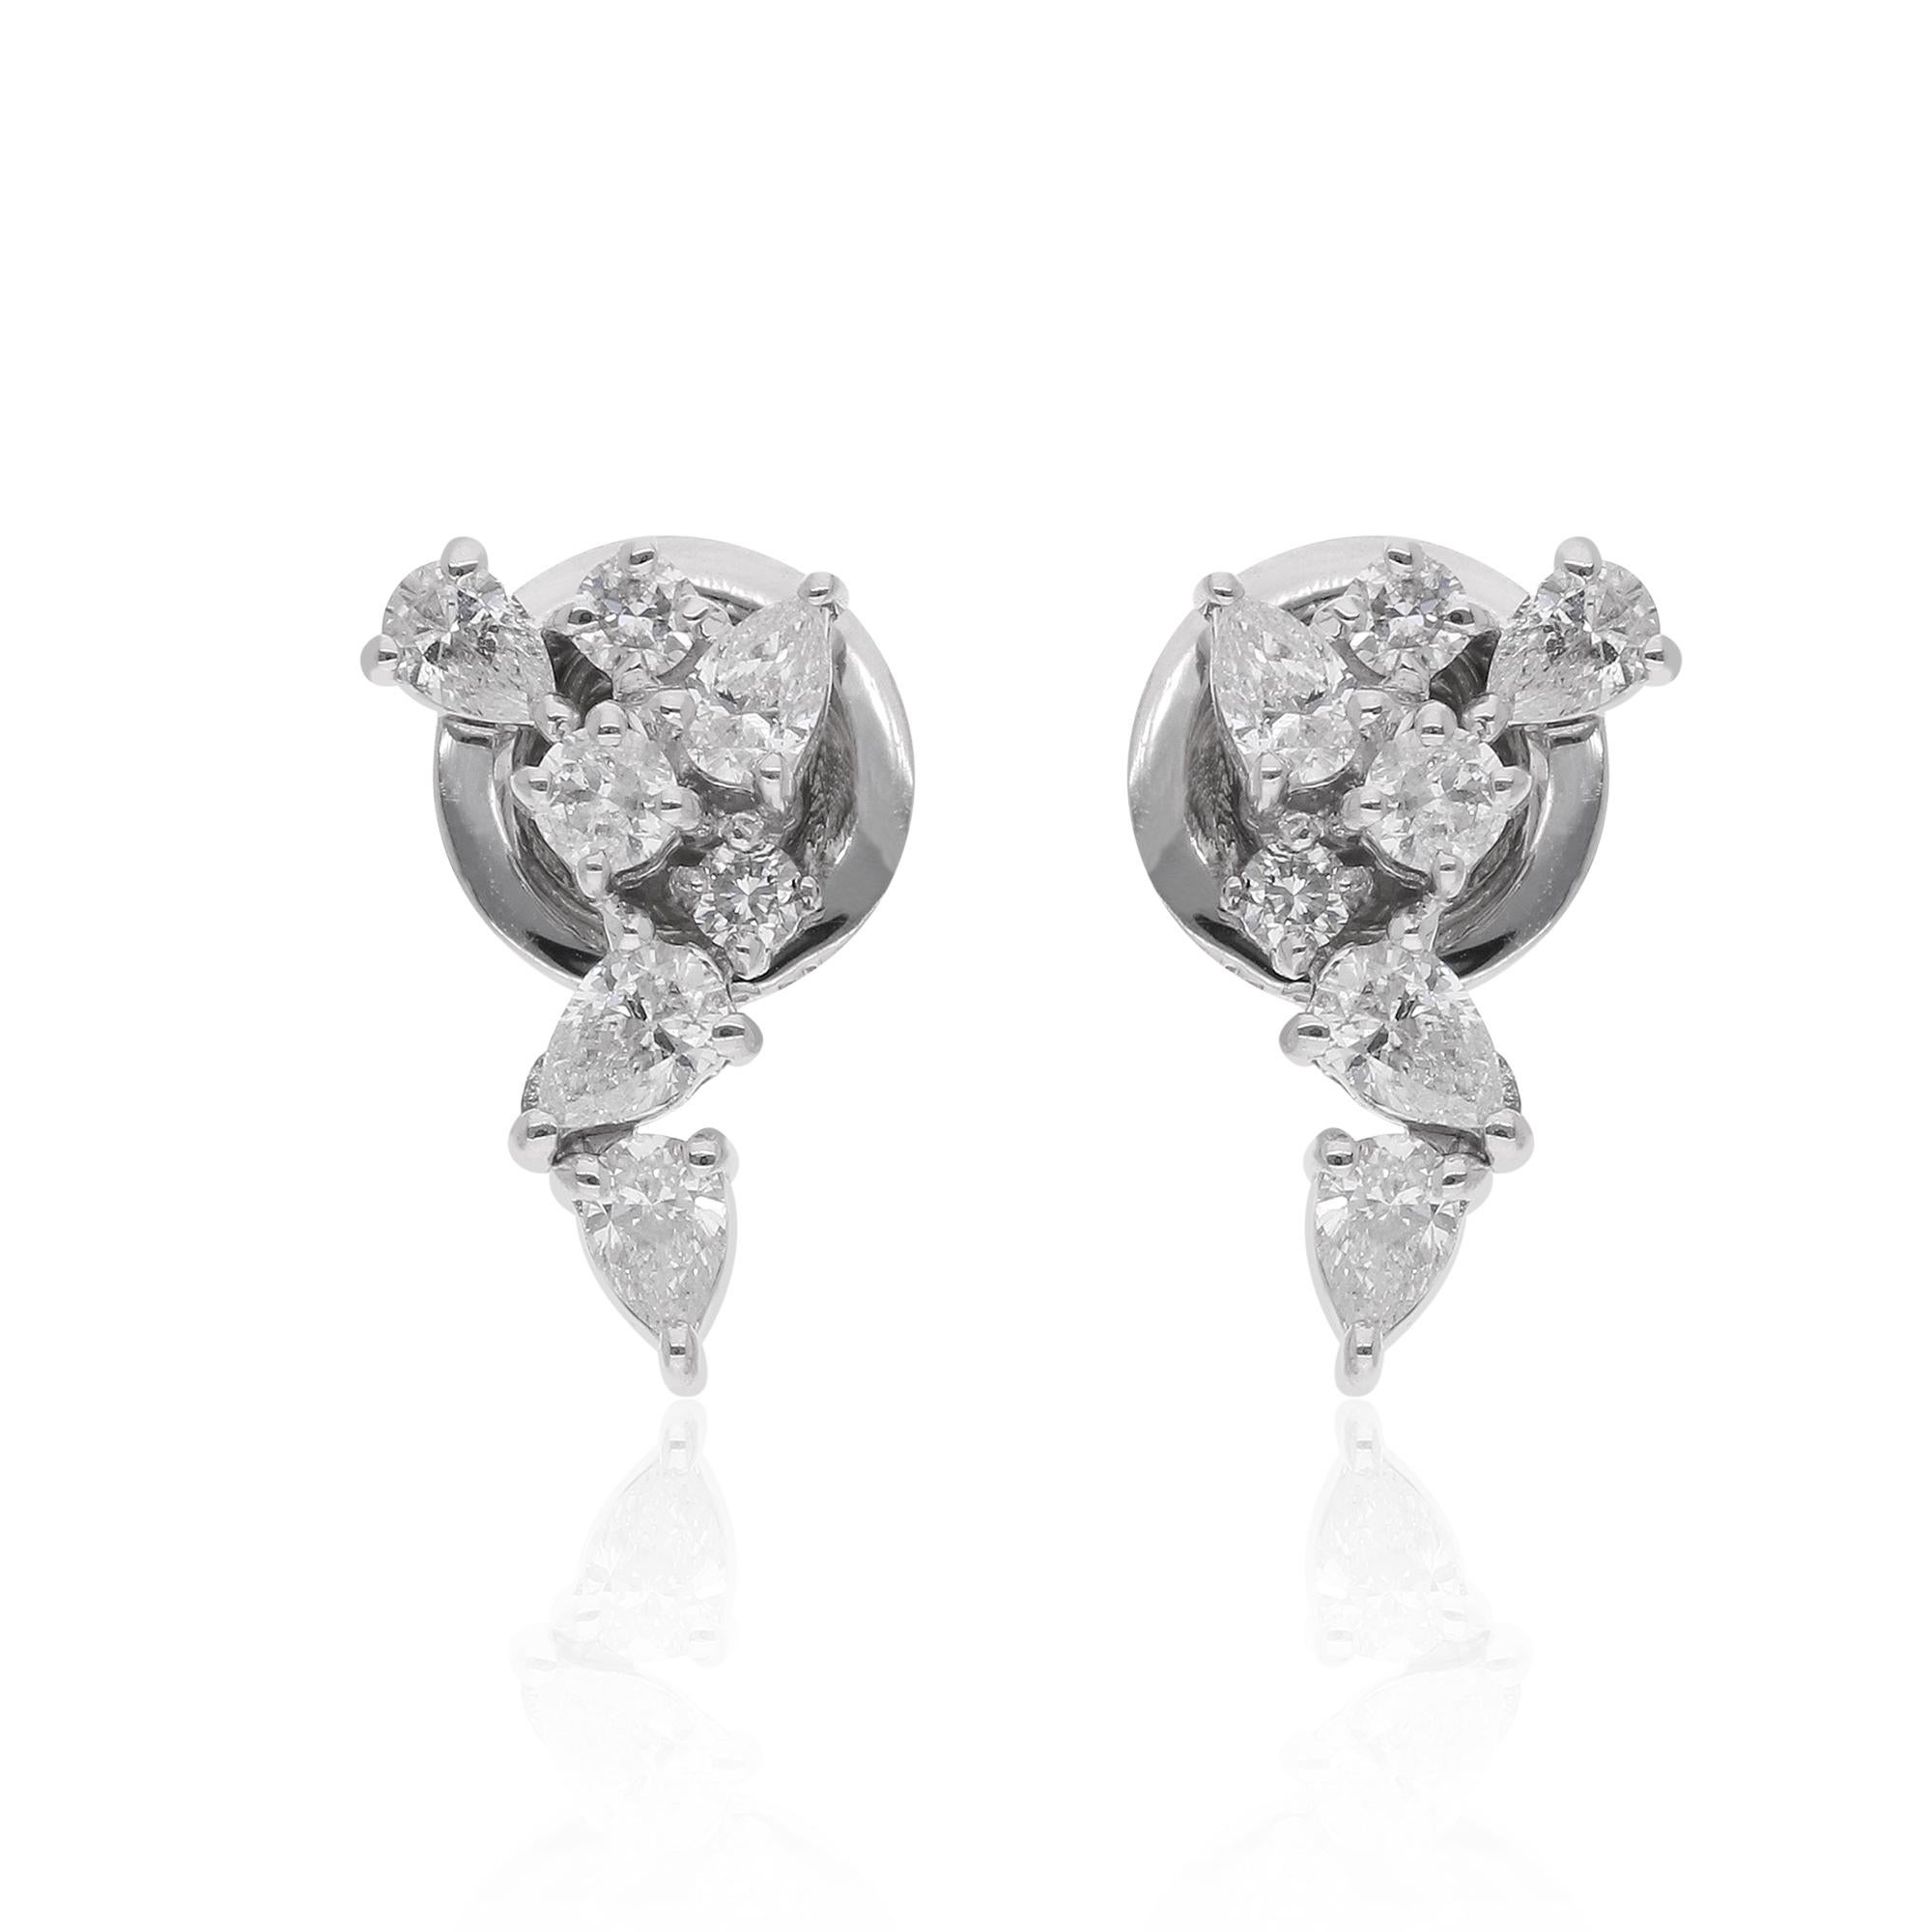 Immerse yourself in the enchanting beauty of these meticulously crafted diamond stud earrings, each a masterpiece of artistry and elegance. Fashioned from the finest 18 karat white gold and adorned with a captivating combination of pear and round